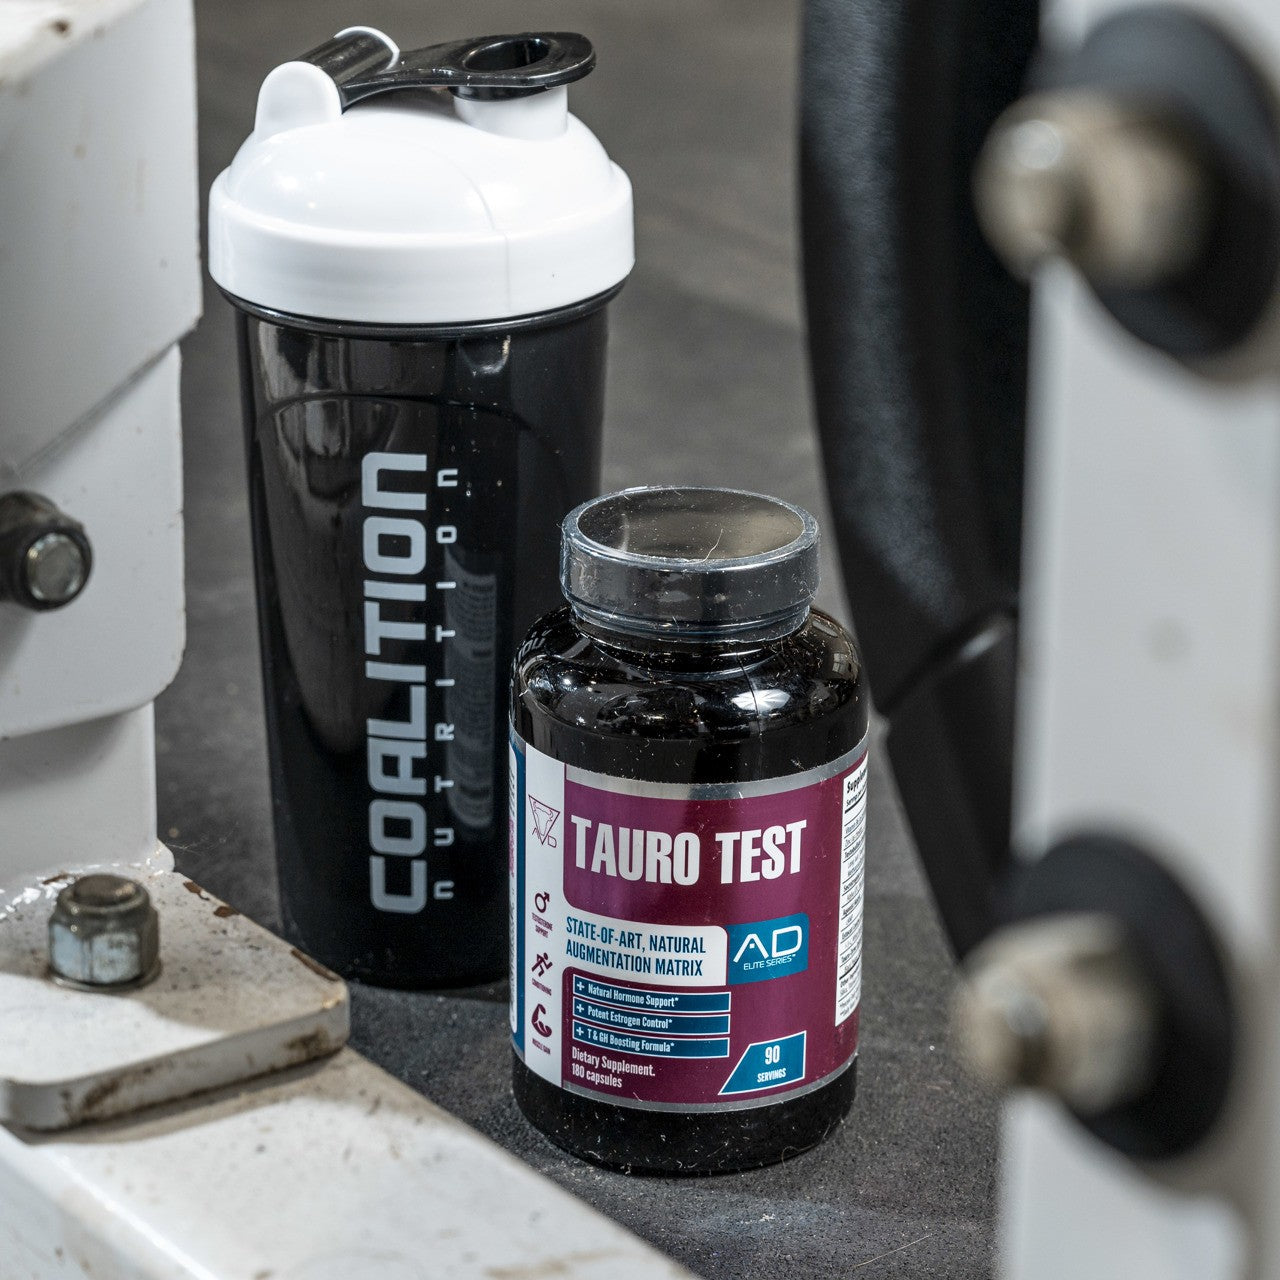 Project AD - Taurotest - CoalitionNutrition